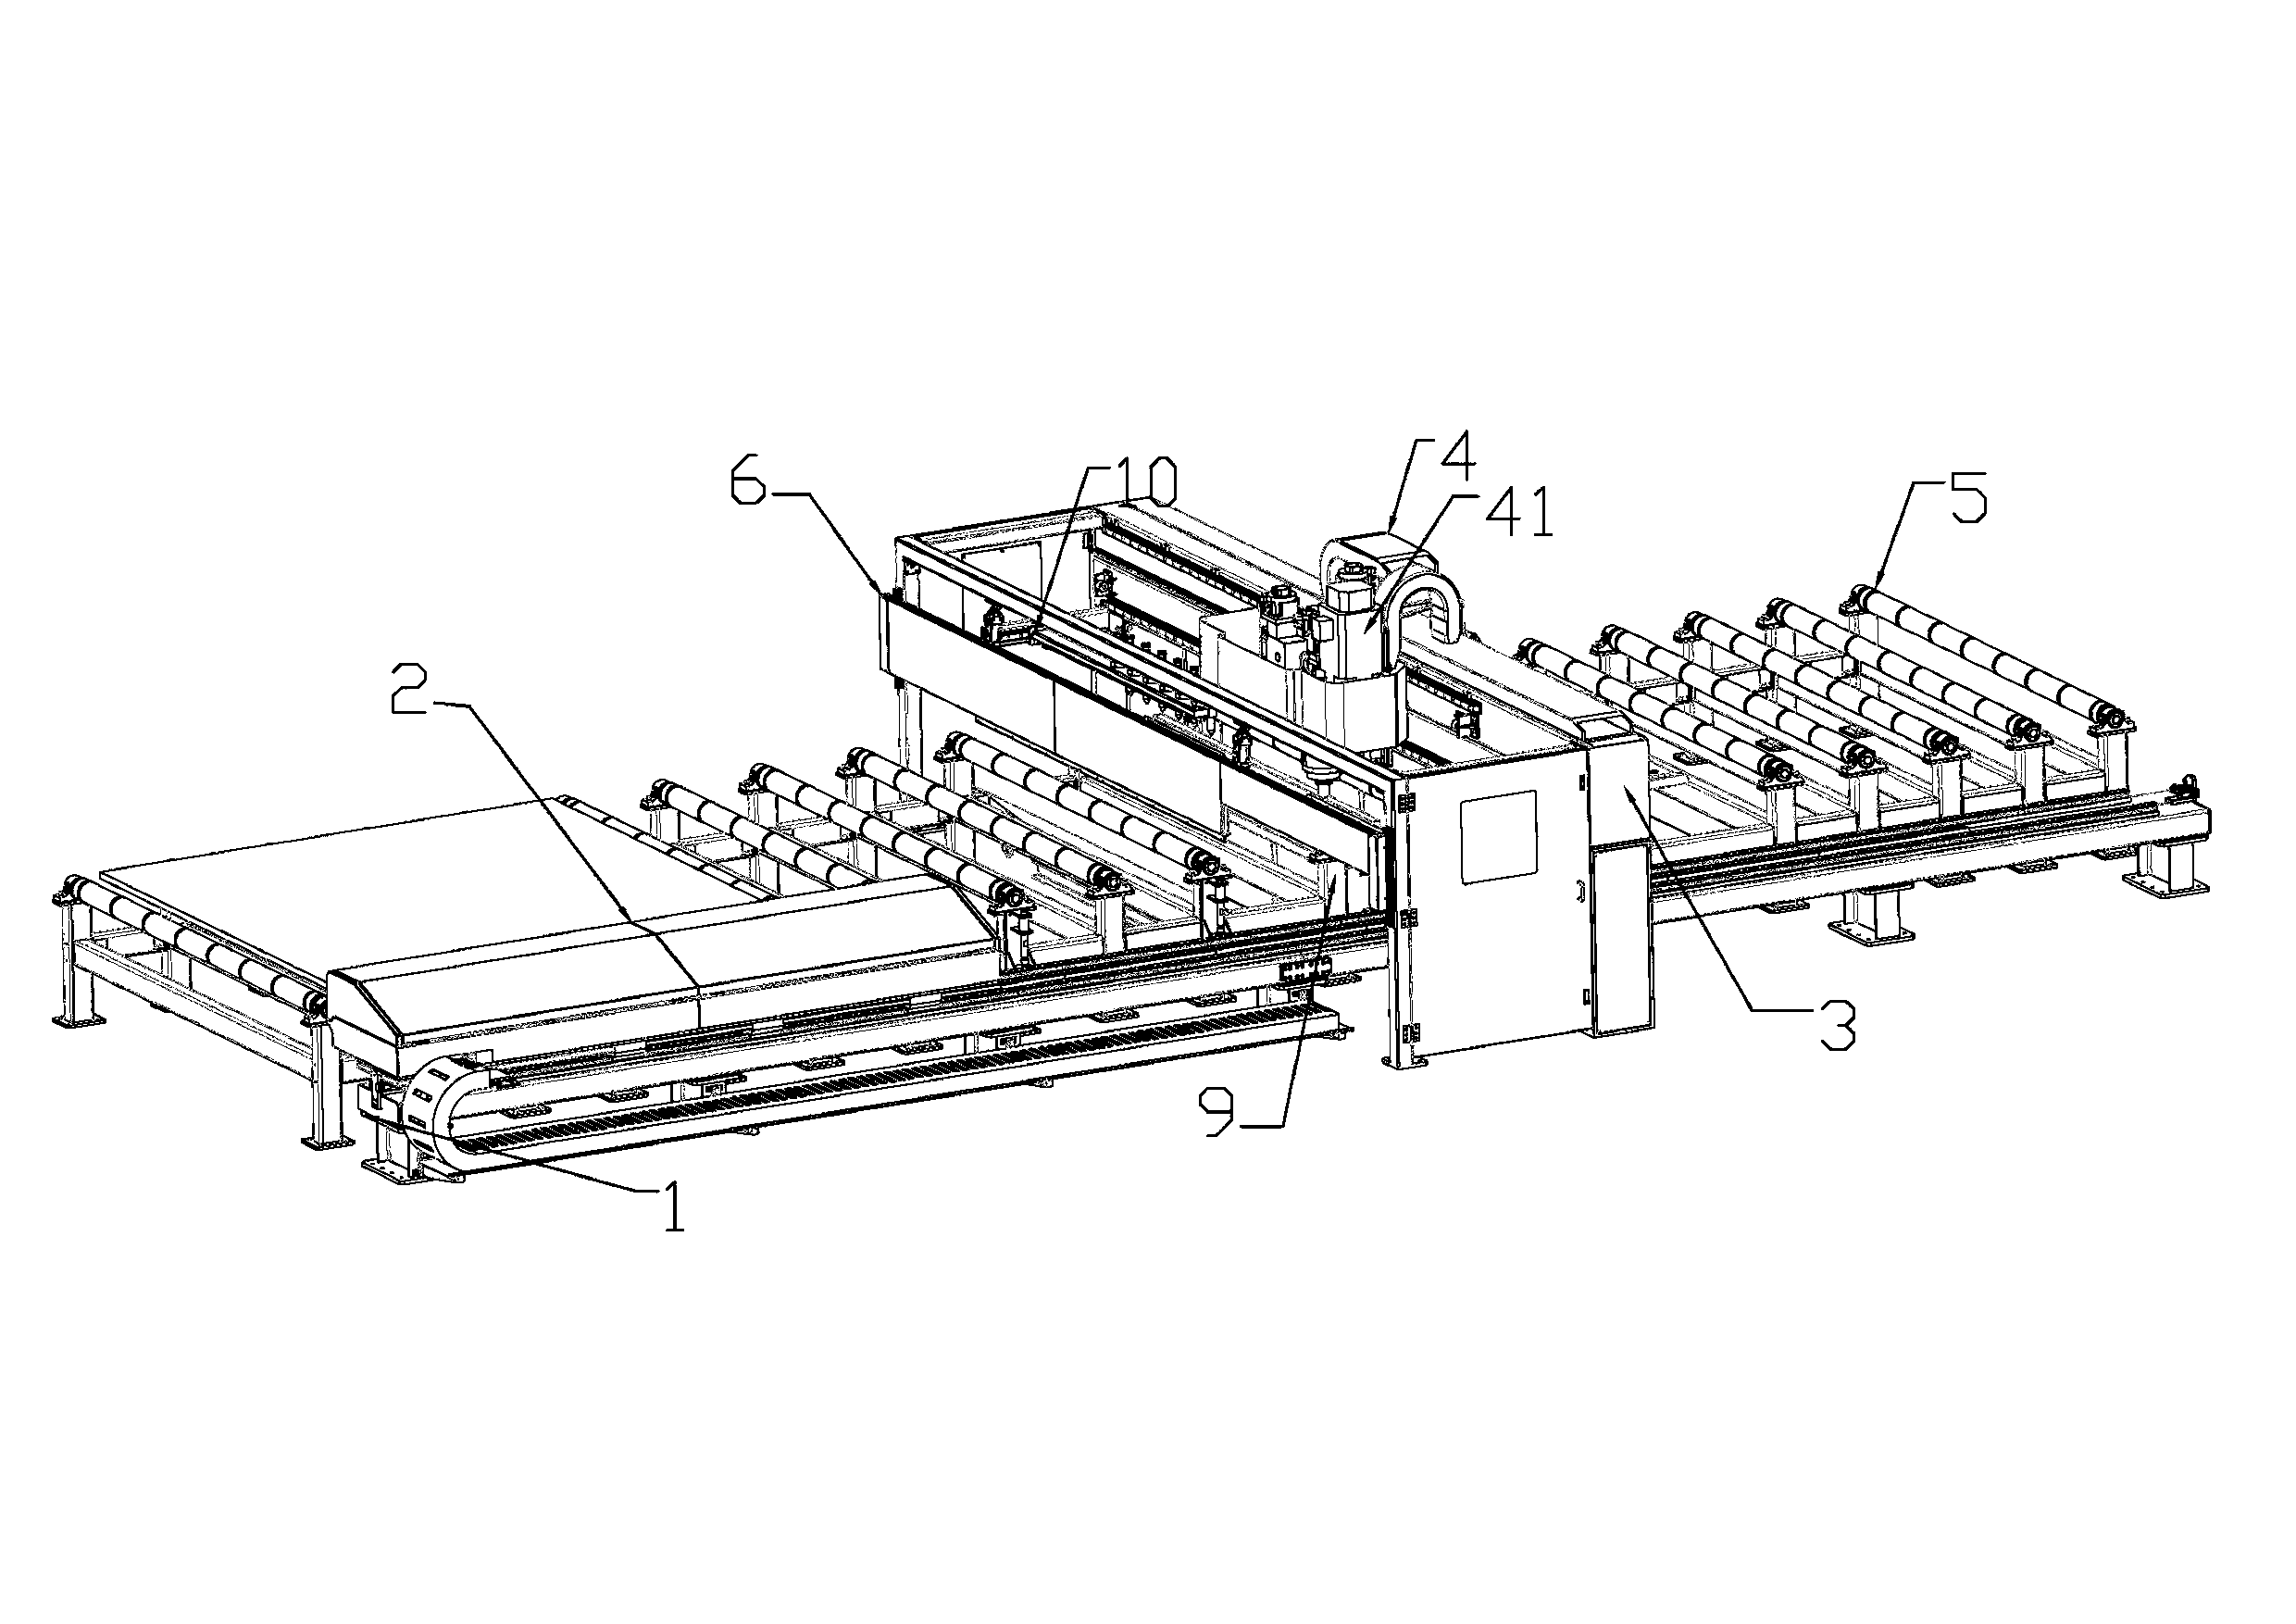 Compound type numerically-controlled machine tool